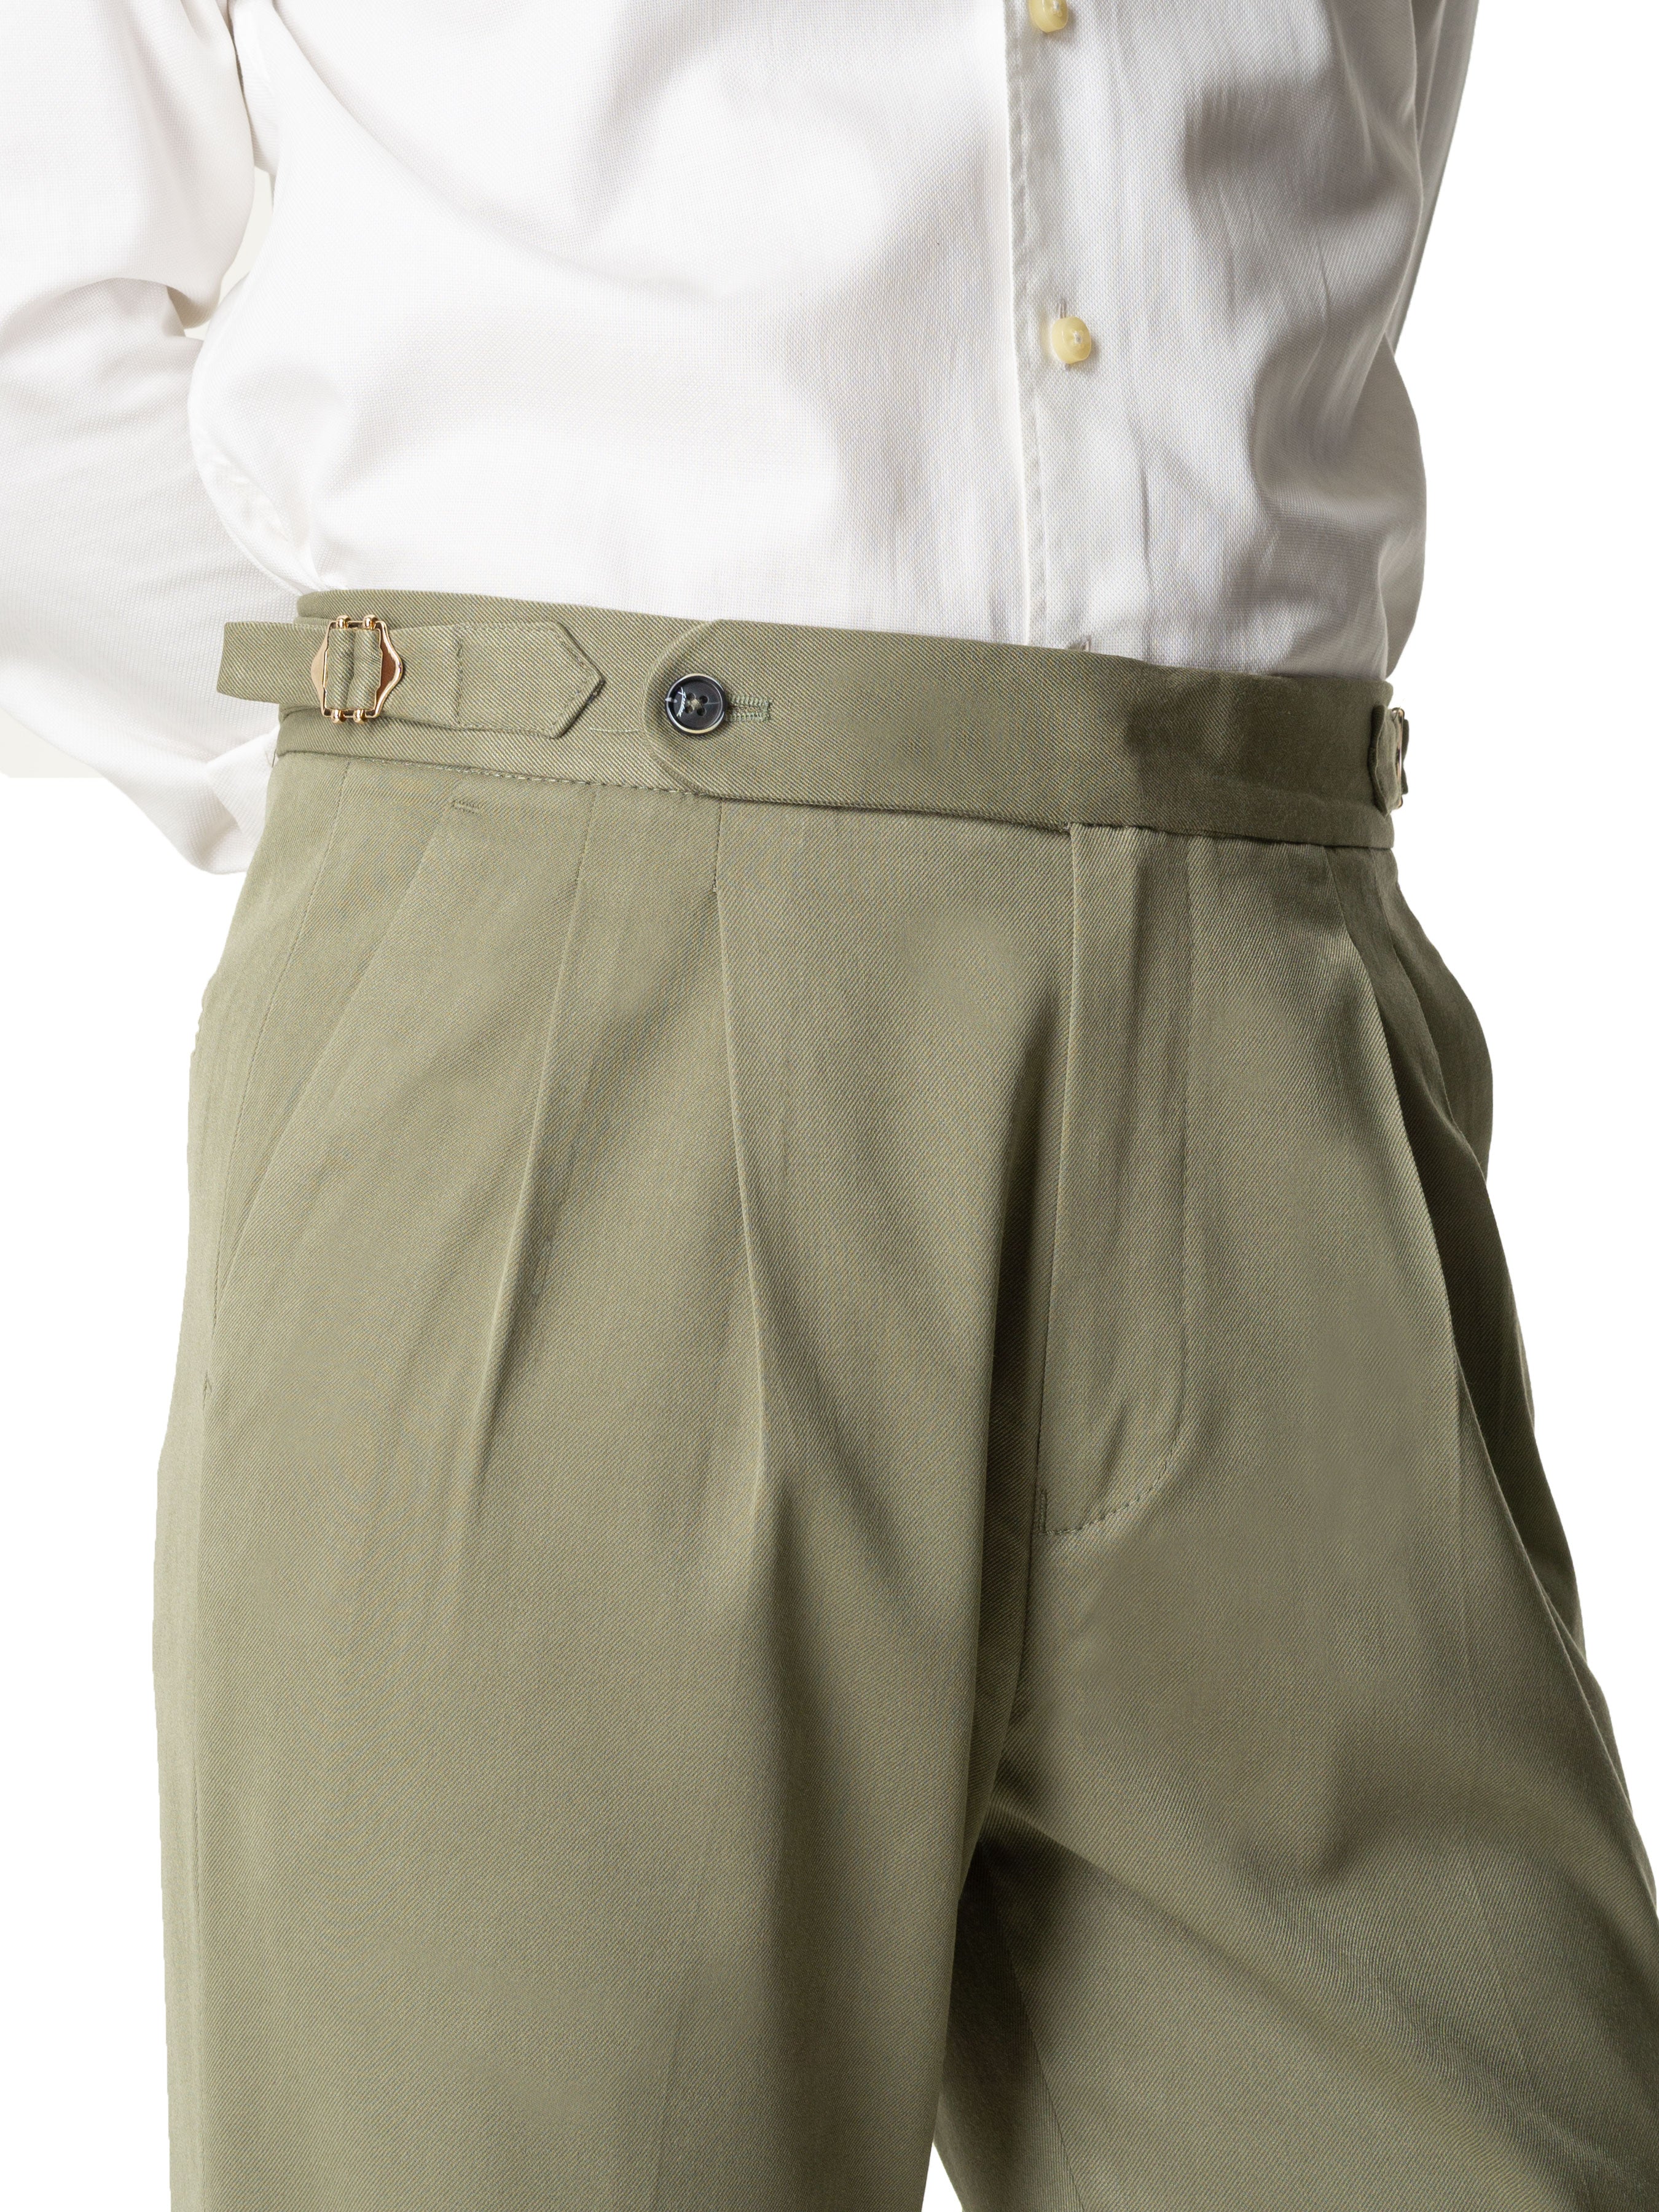 Trousers With Side Adjusters - Olive Green Cuffed (Stretchable) - Zeve Shoes